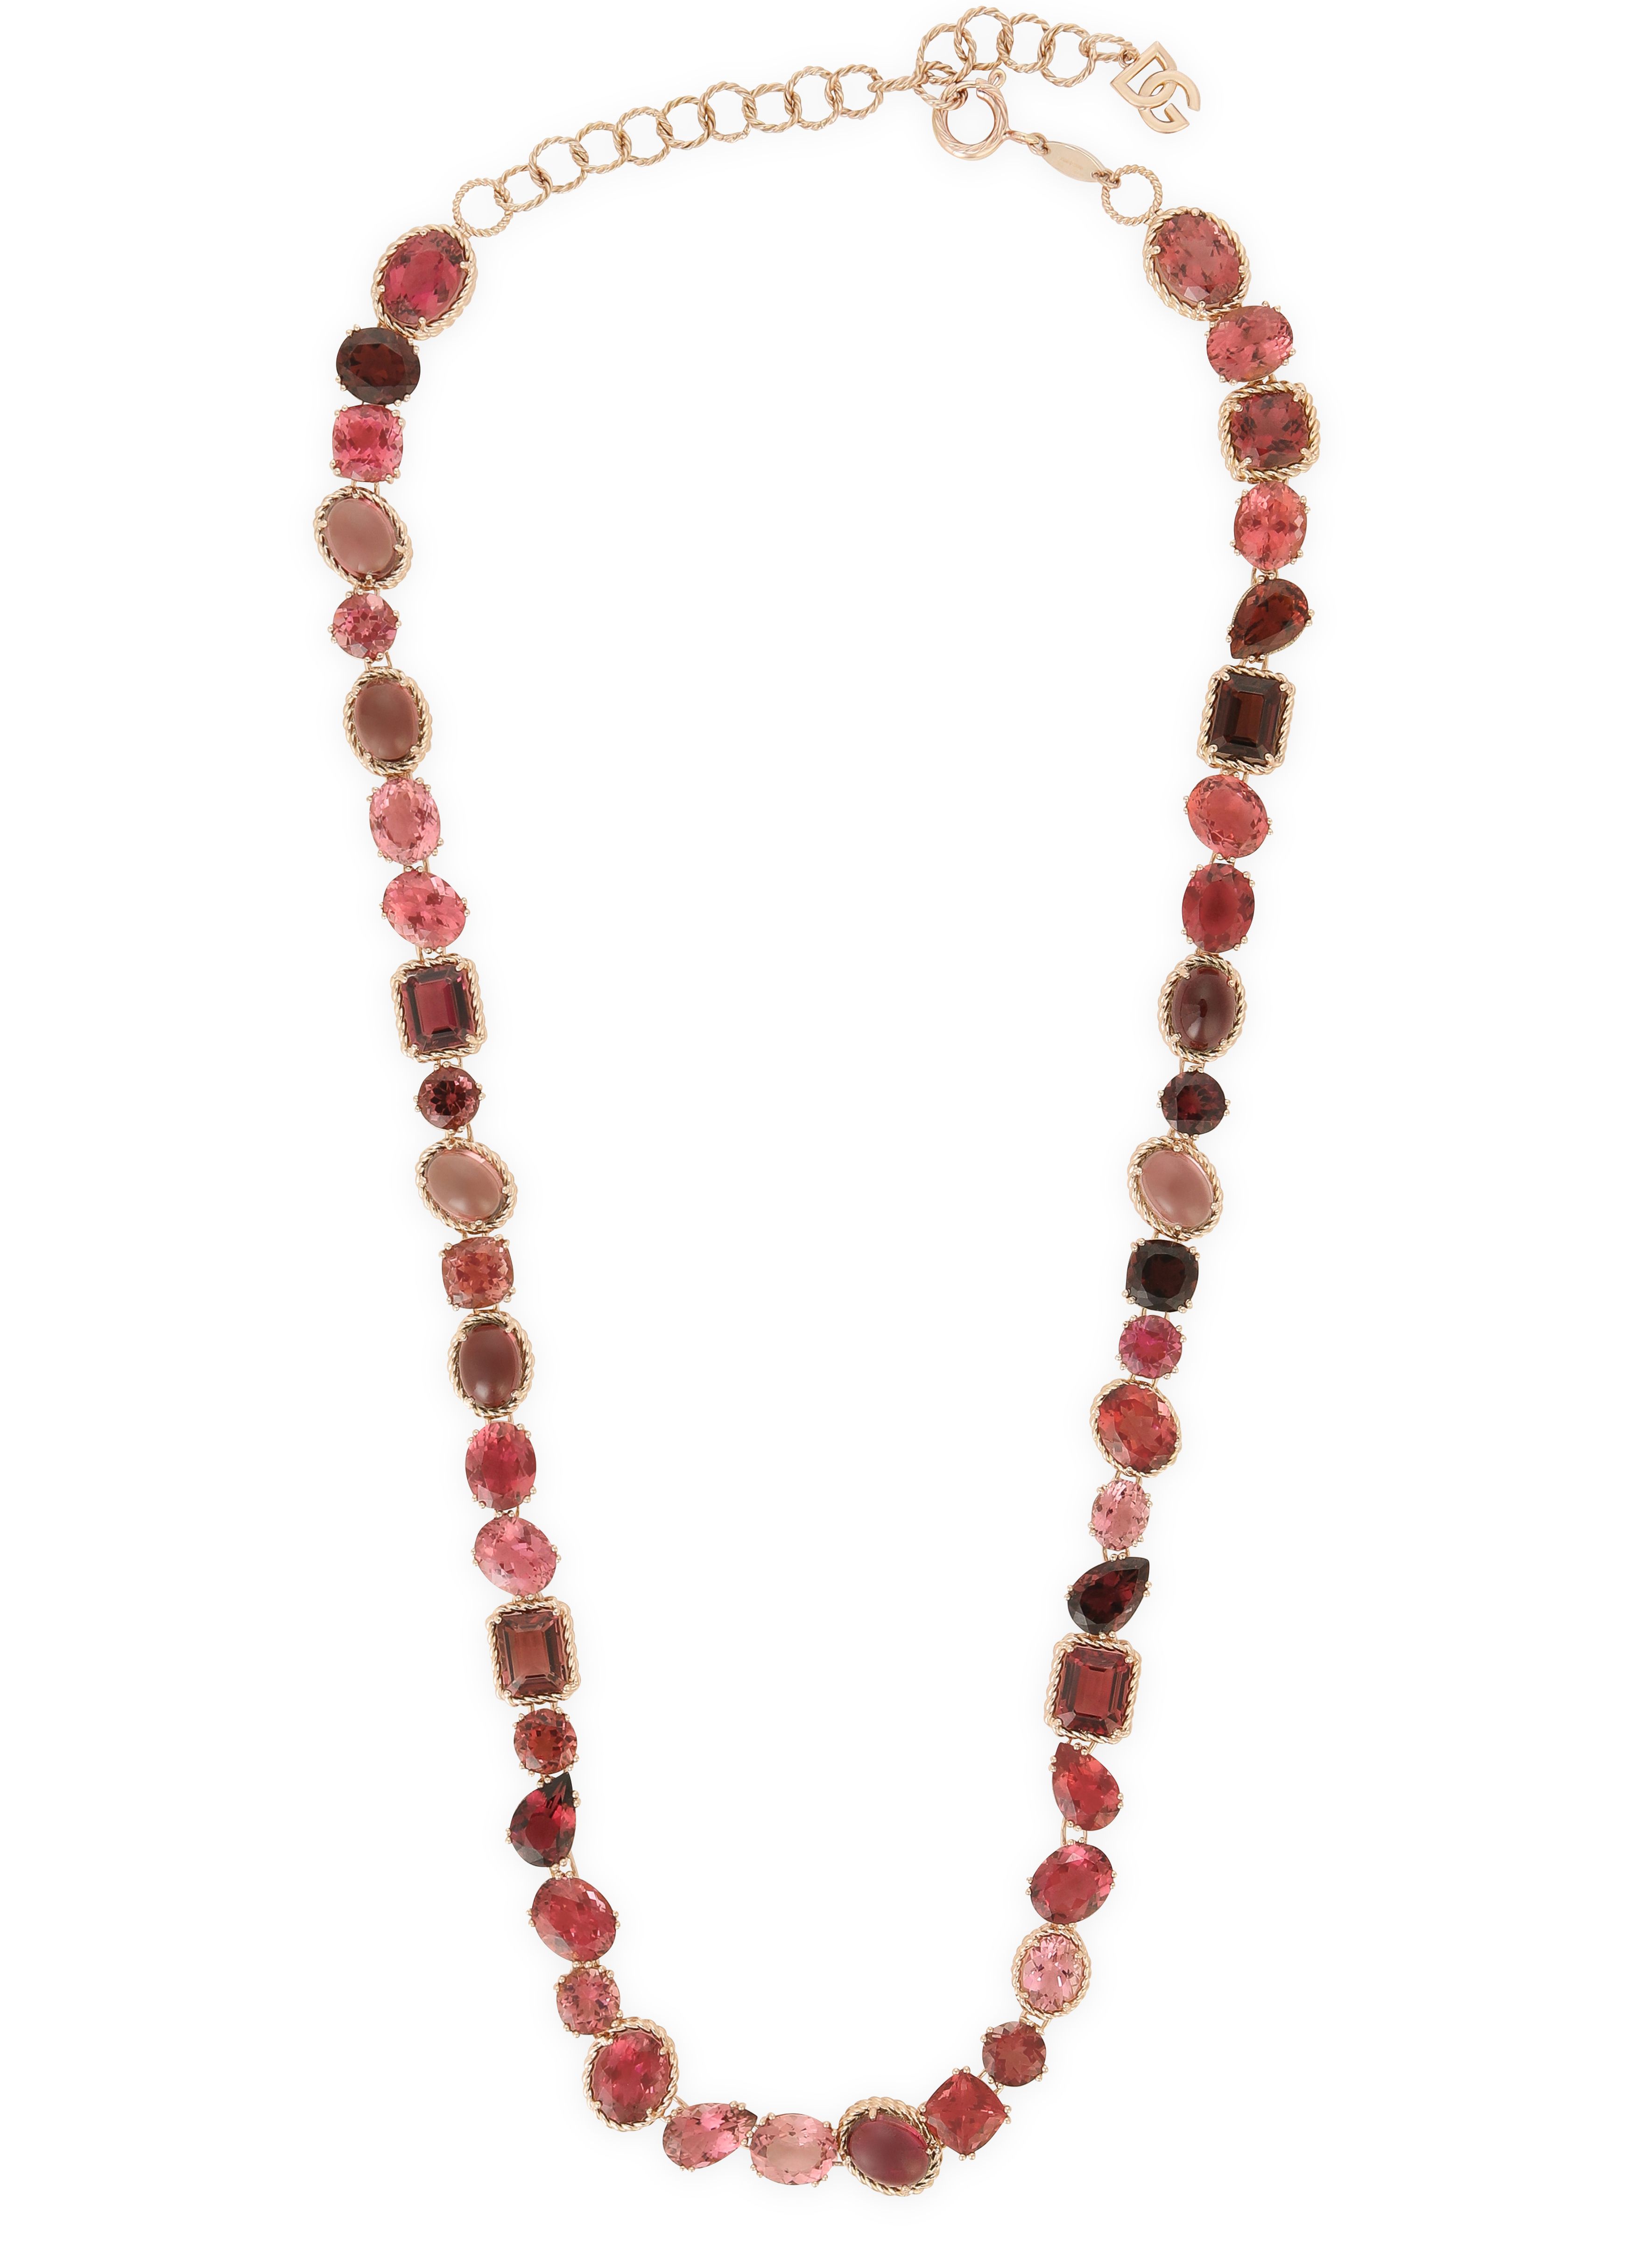 Dolce & Gabbana Anna necklace in red gold 18kt